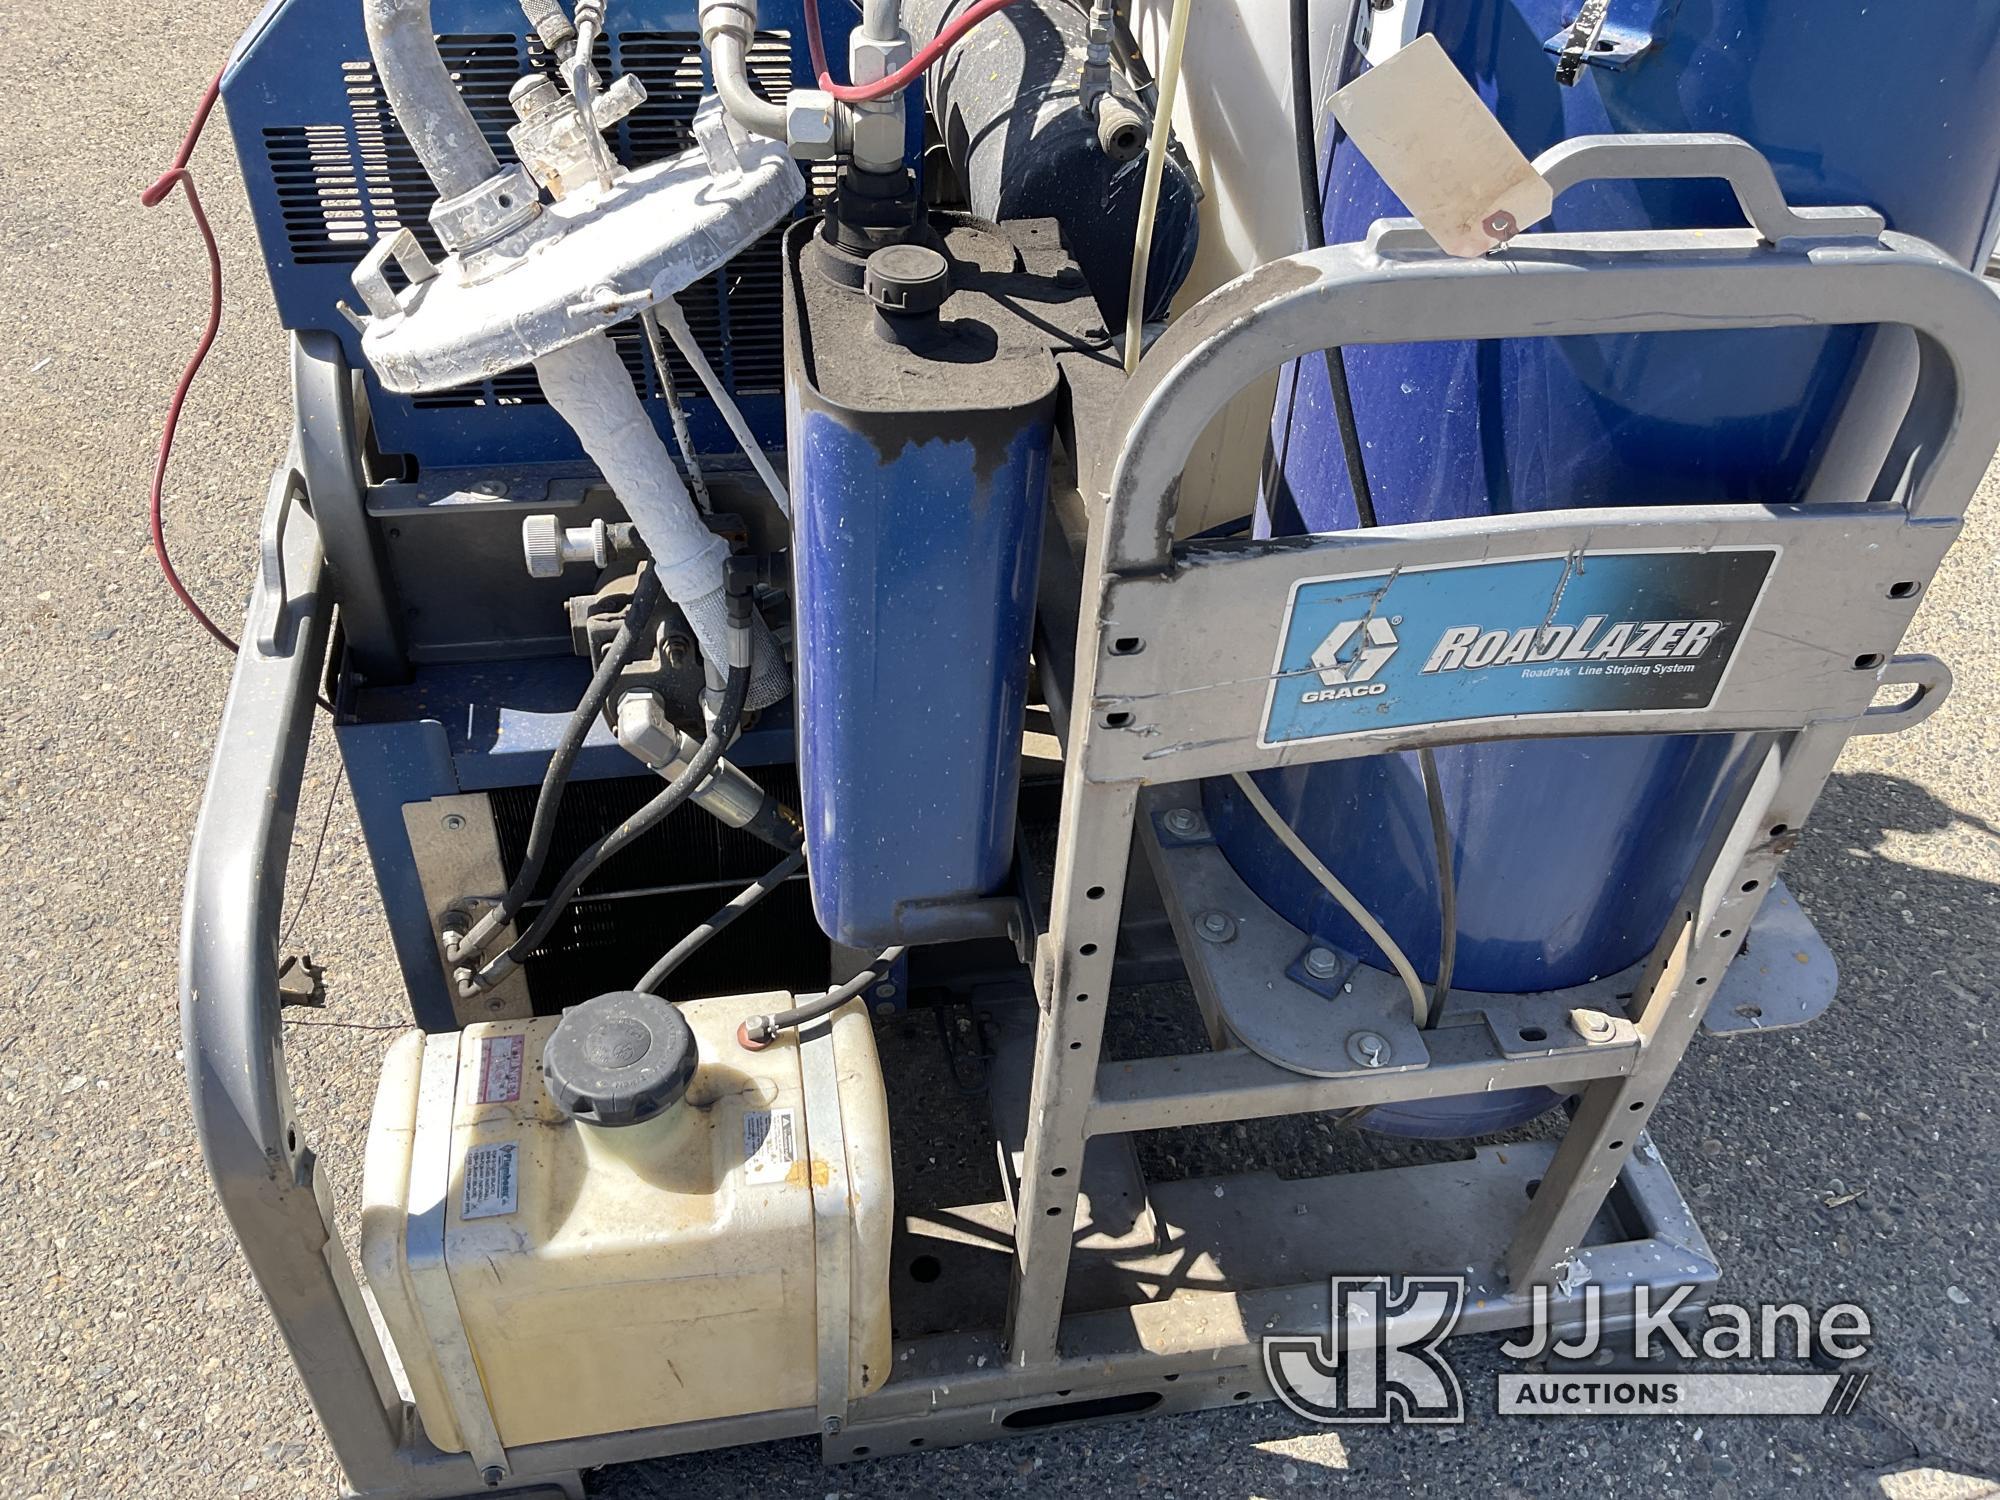 (Dixon, CA) Graco Road Lazer RPS 2900 Walk Behind Road Stripper NOTE: This unit is being sold AS IS/